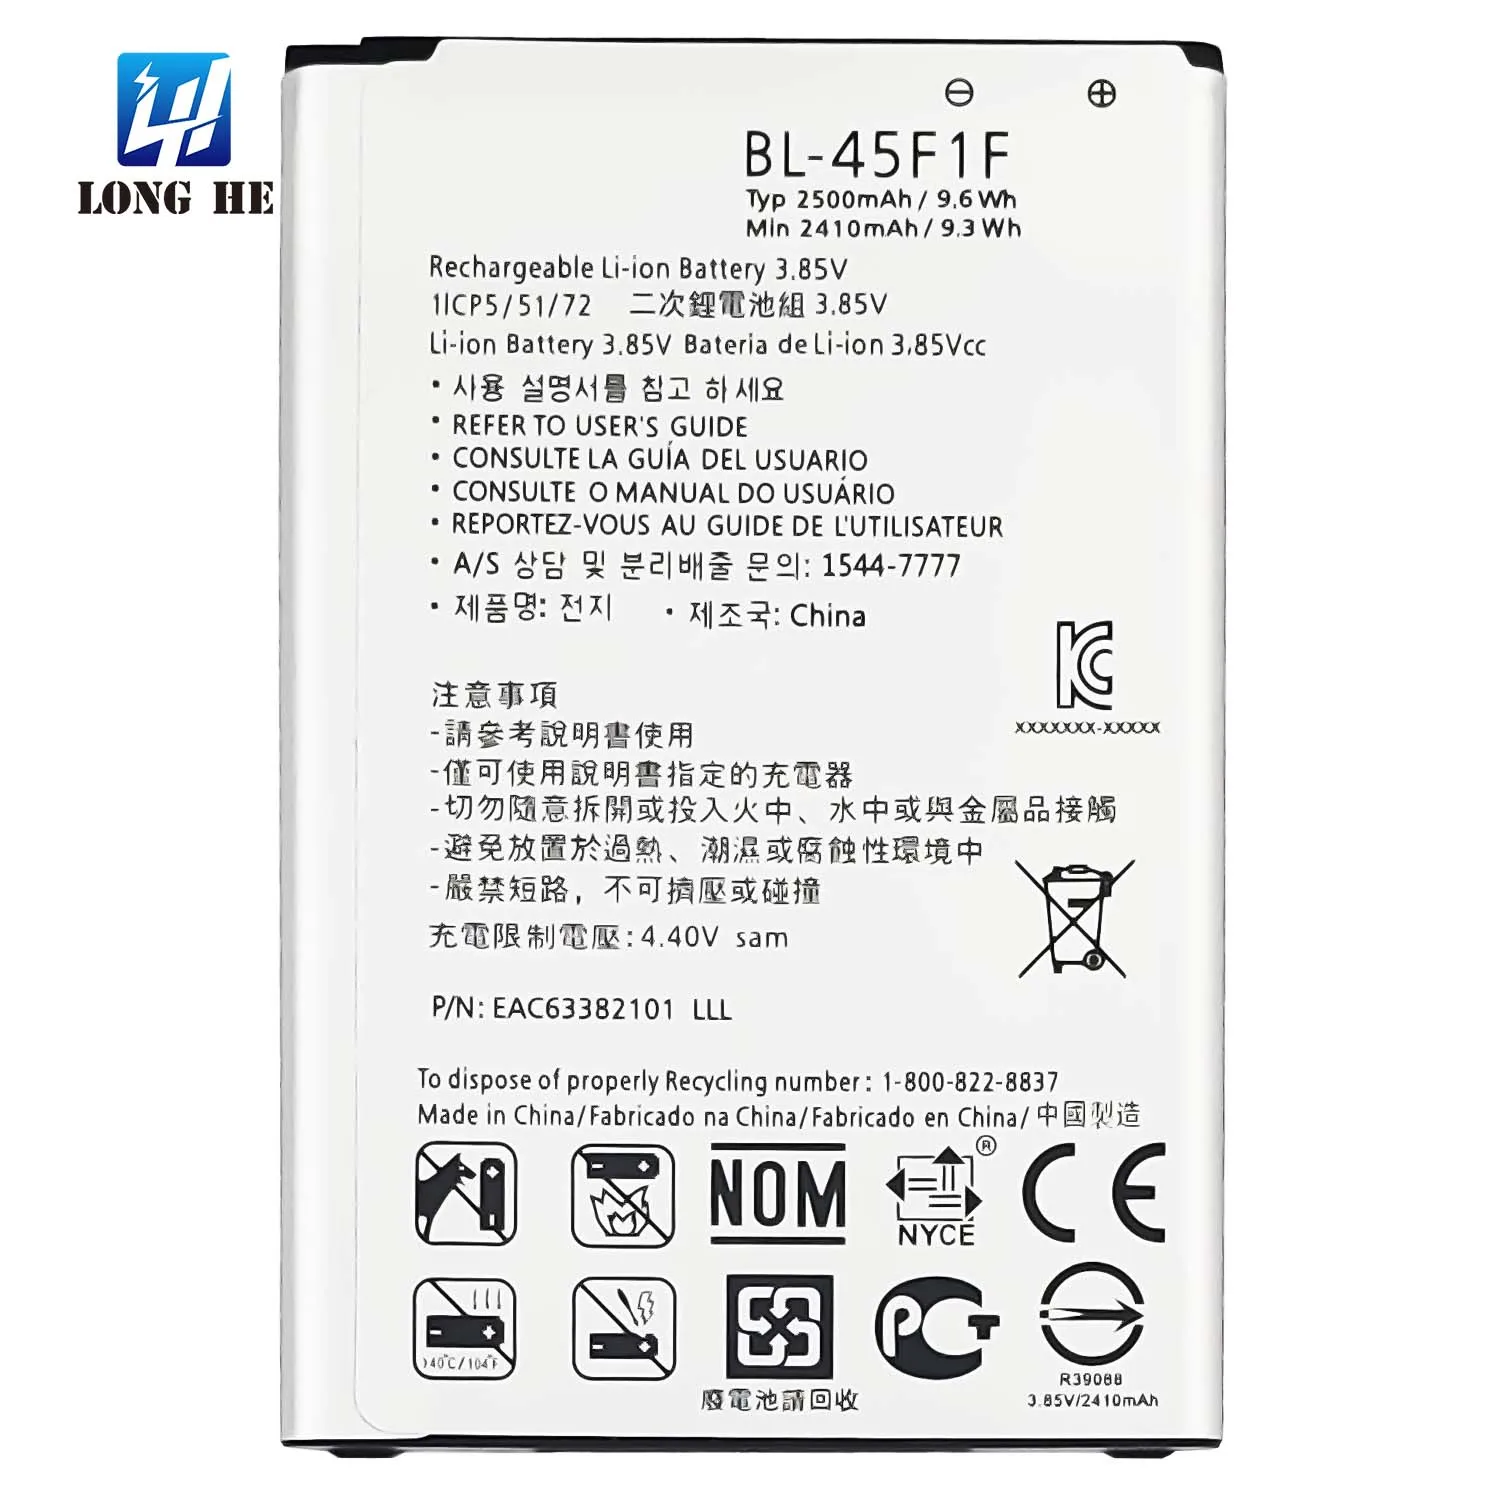 

BL-45F1F X210G M210 K7i K4 K7 K8 K9 M200N X240 US215 X300 M200 m210 High quality mobile phone battery for LG Aristo 2